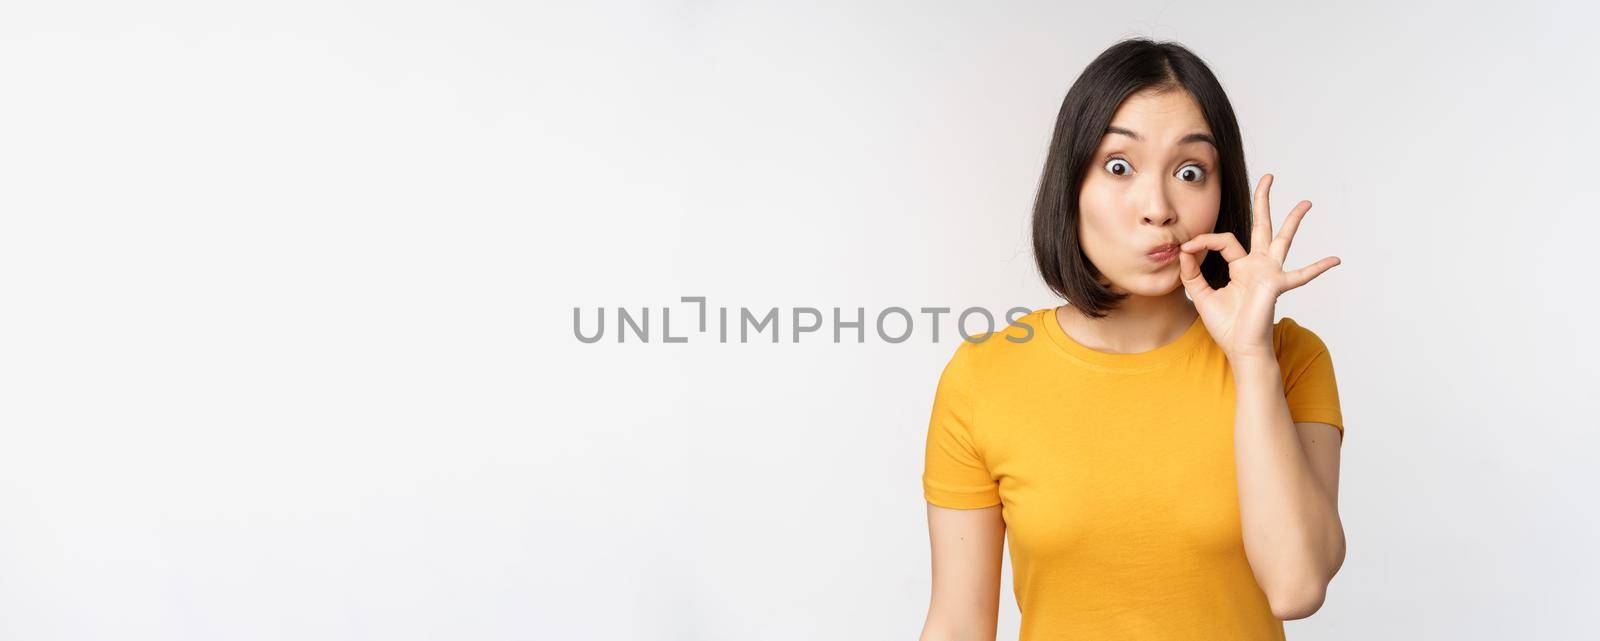 Cute asian girl seal lips, zipping mouth with finger, promise to keep secret, taboo gesture, standing in yellow tshirt over white background.